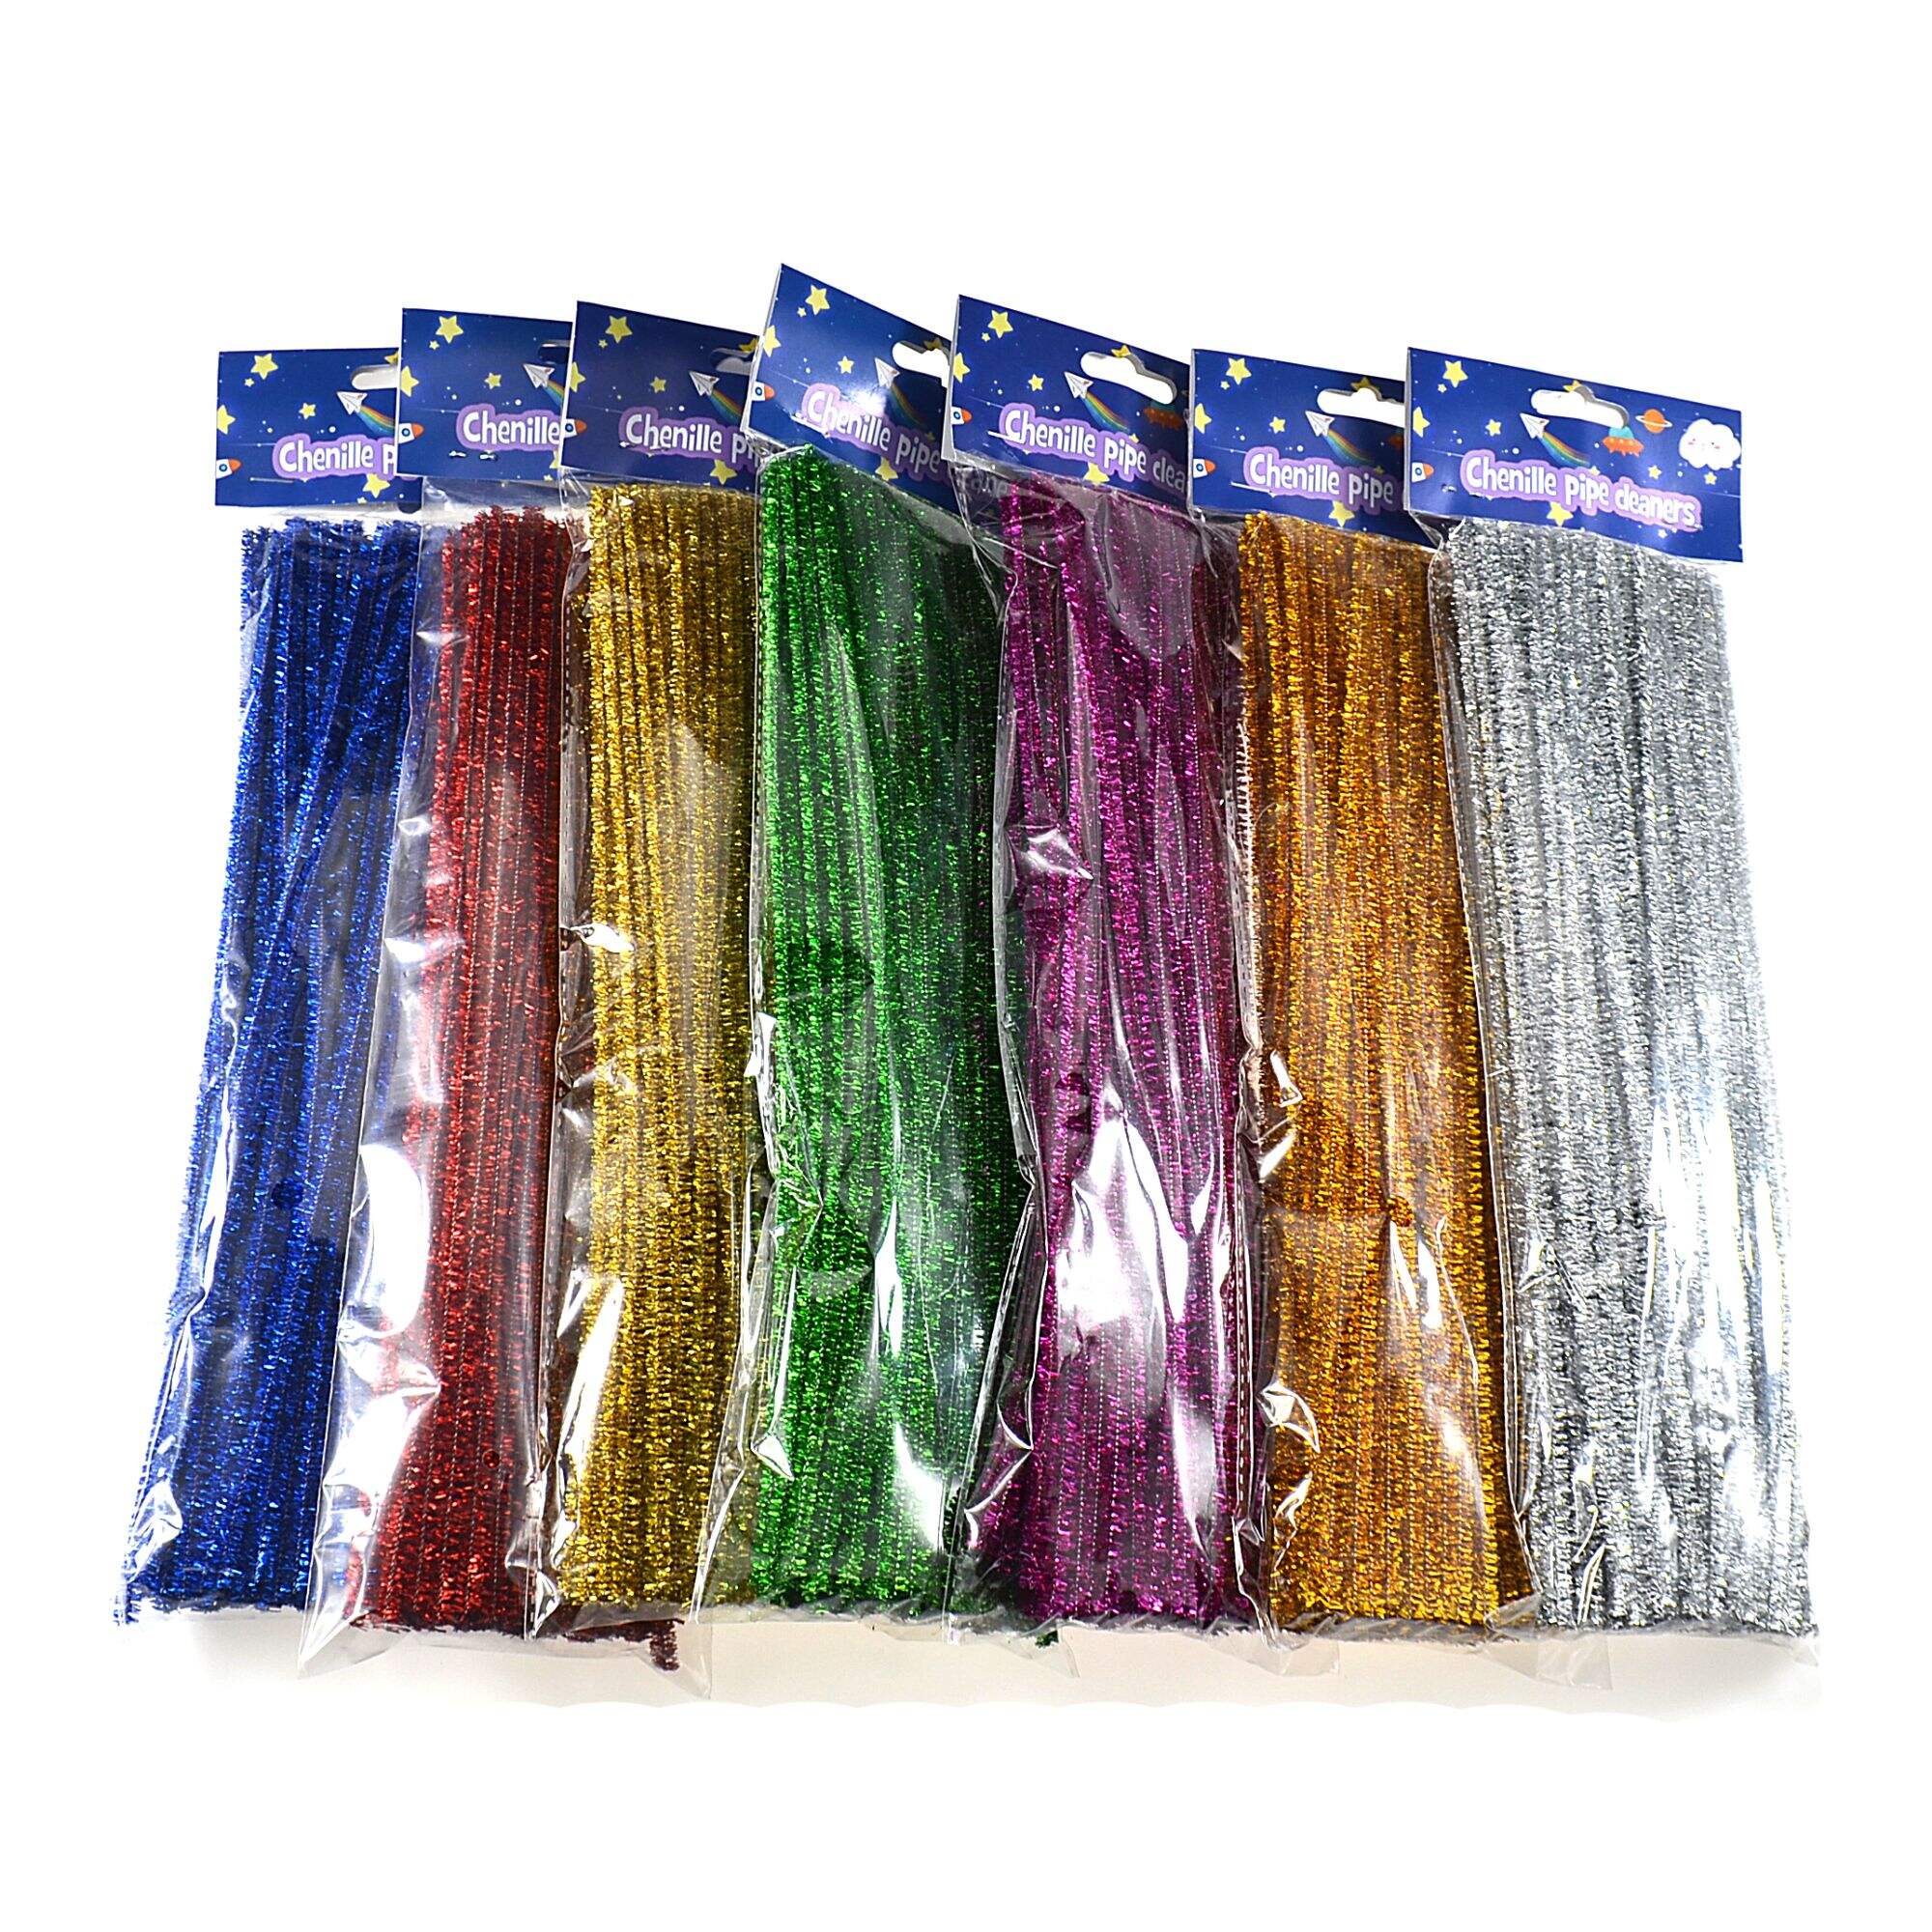 100pcs/bag Glittery Chenille Stems Pipe Cleaners